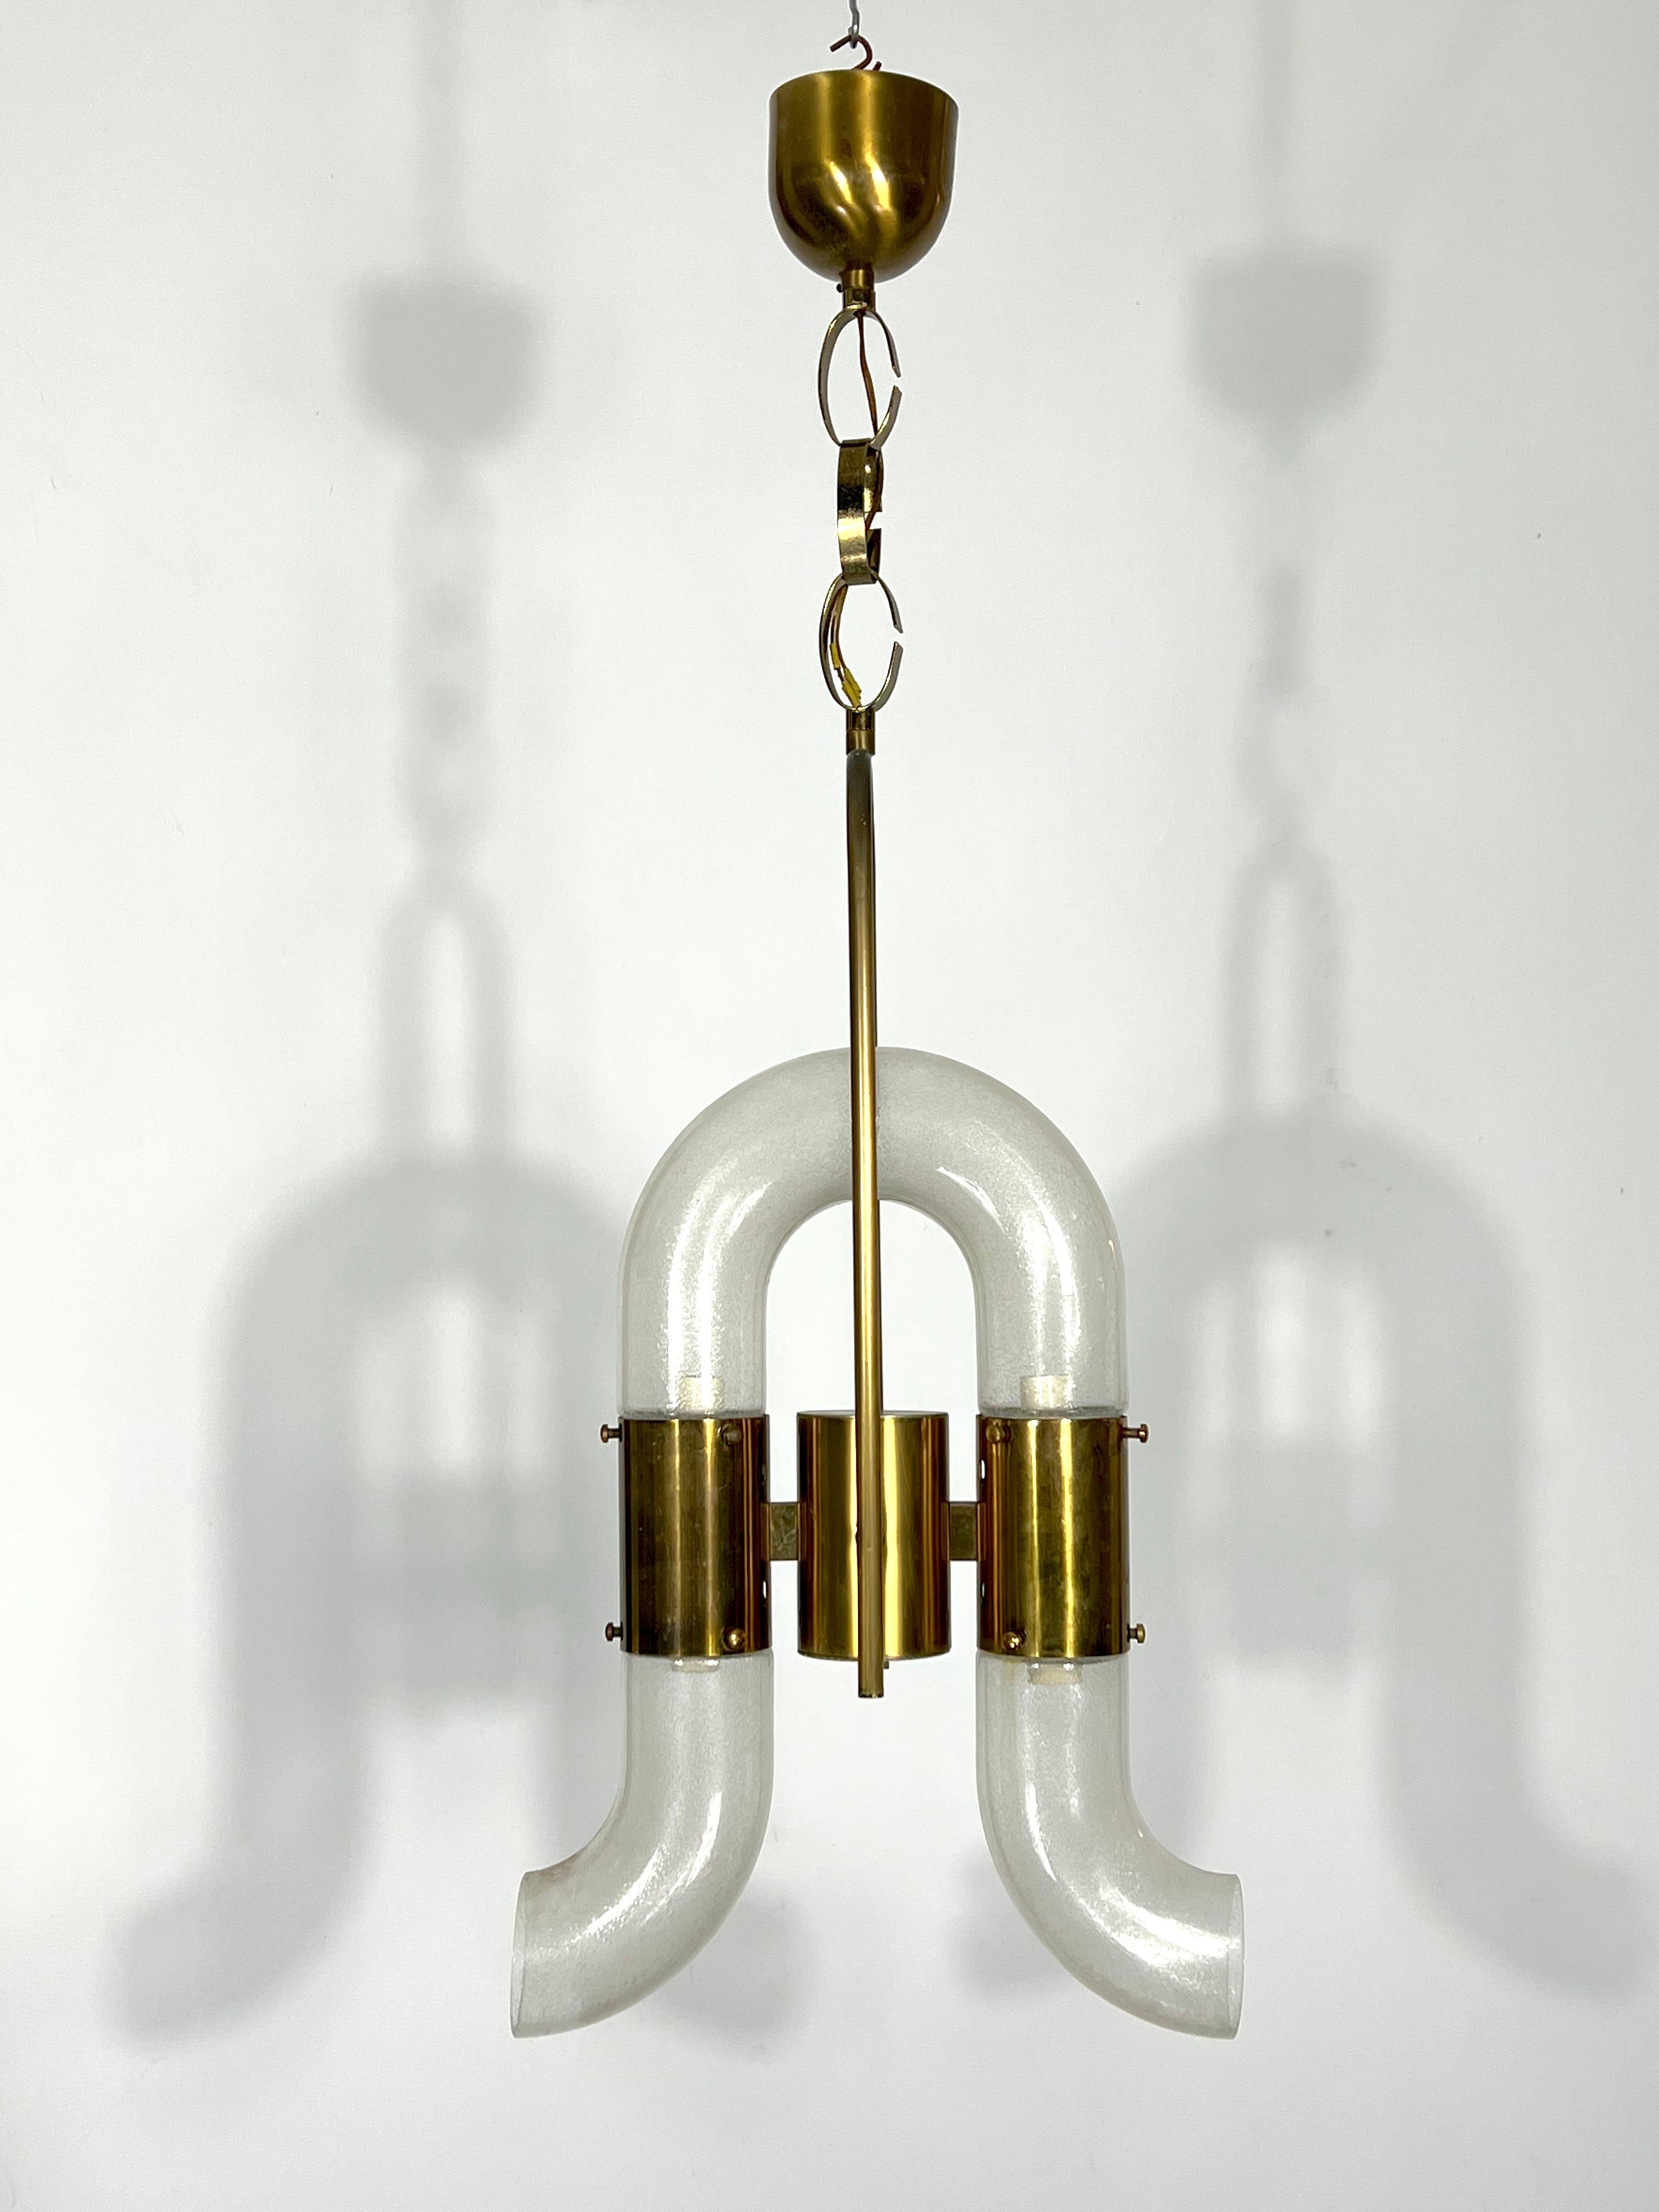 Great vintage confition with normal trace of age and use for this chandelier designed by Carlo Nason and produced by Mazzega during the 70s. It is made from solid brass and three pieces of pulegoso murano glass. Full working. No chips or